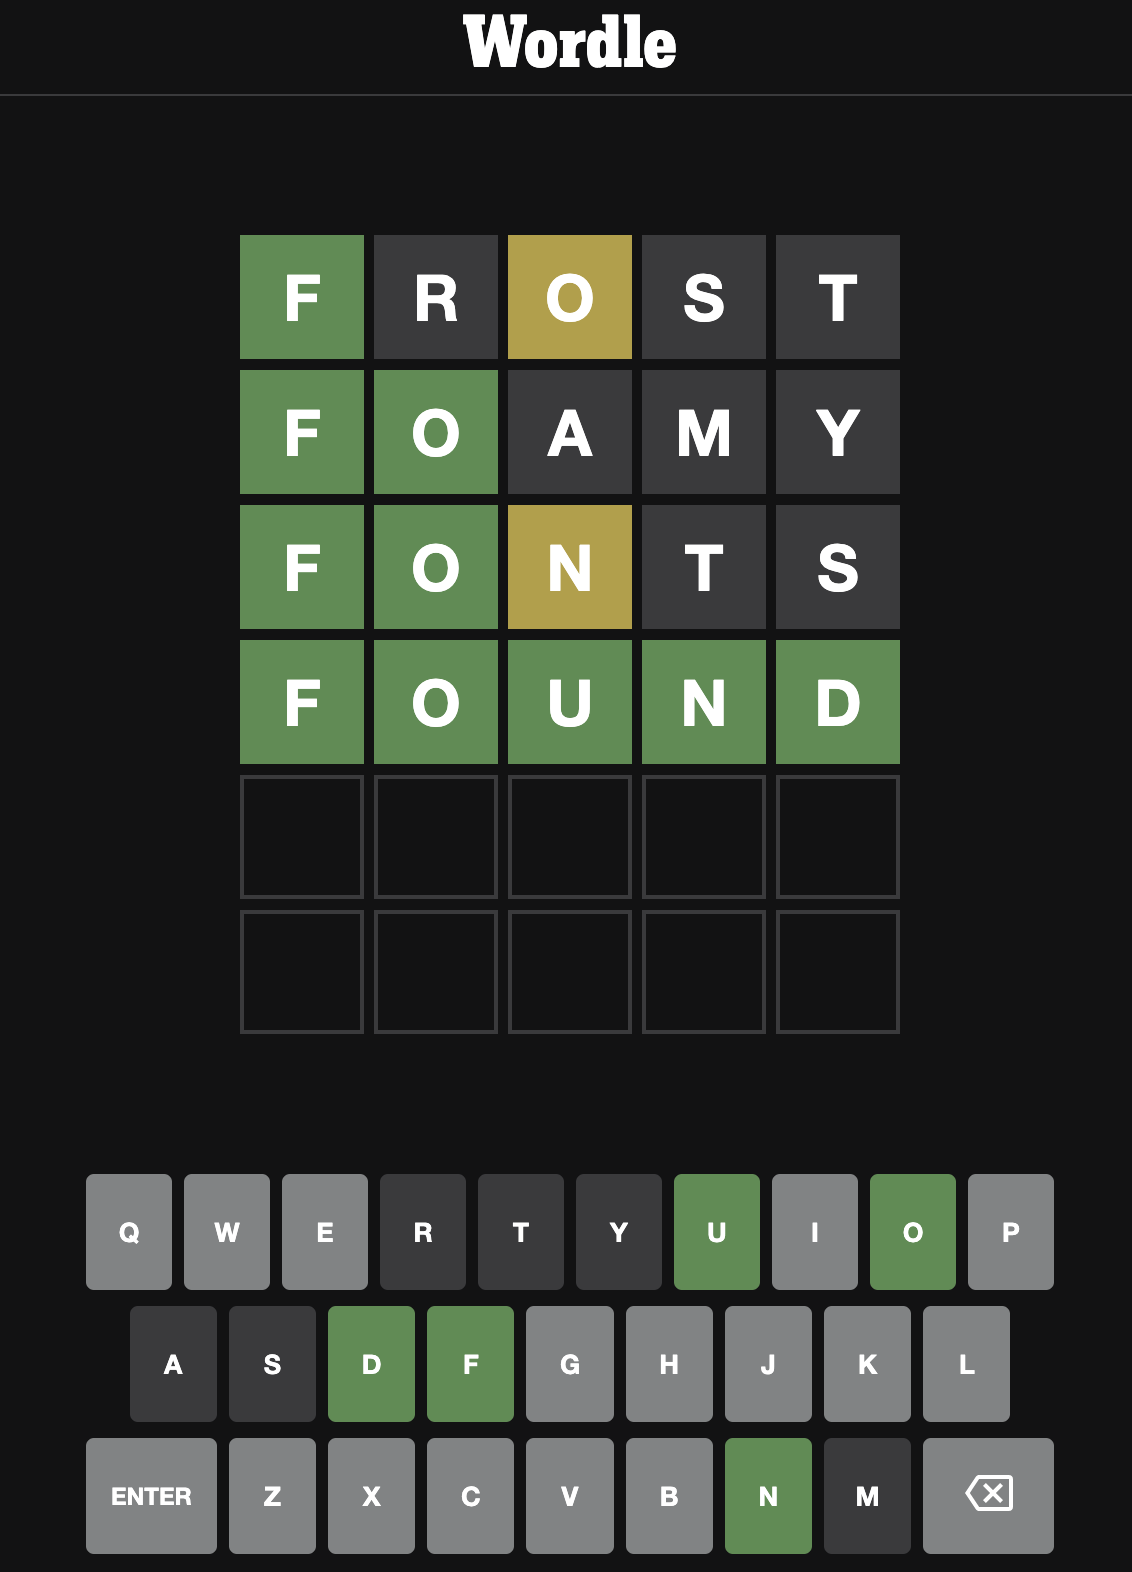 A screenshot of a Wordle game depicts a series of guess words and then the answer to the game. The first word attempted was “Frost,” the second word attempted was “Foamy,” the third word the user tried was “Fonts,” and finally, the answer to the game was “Found.” 